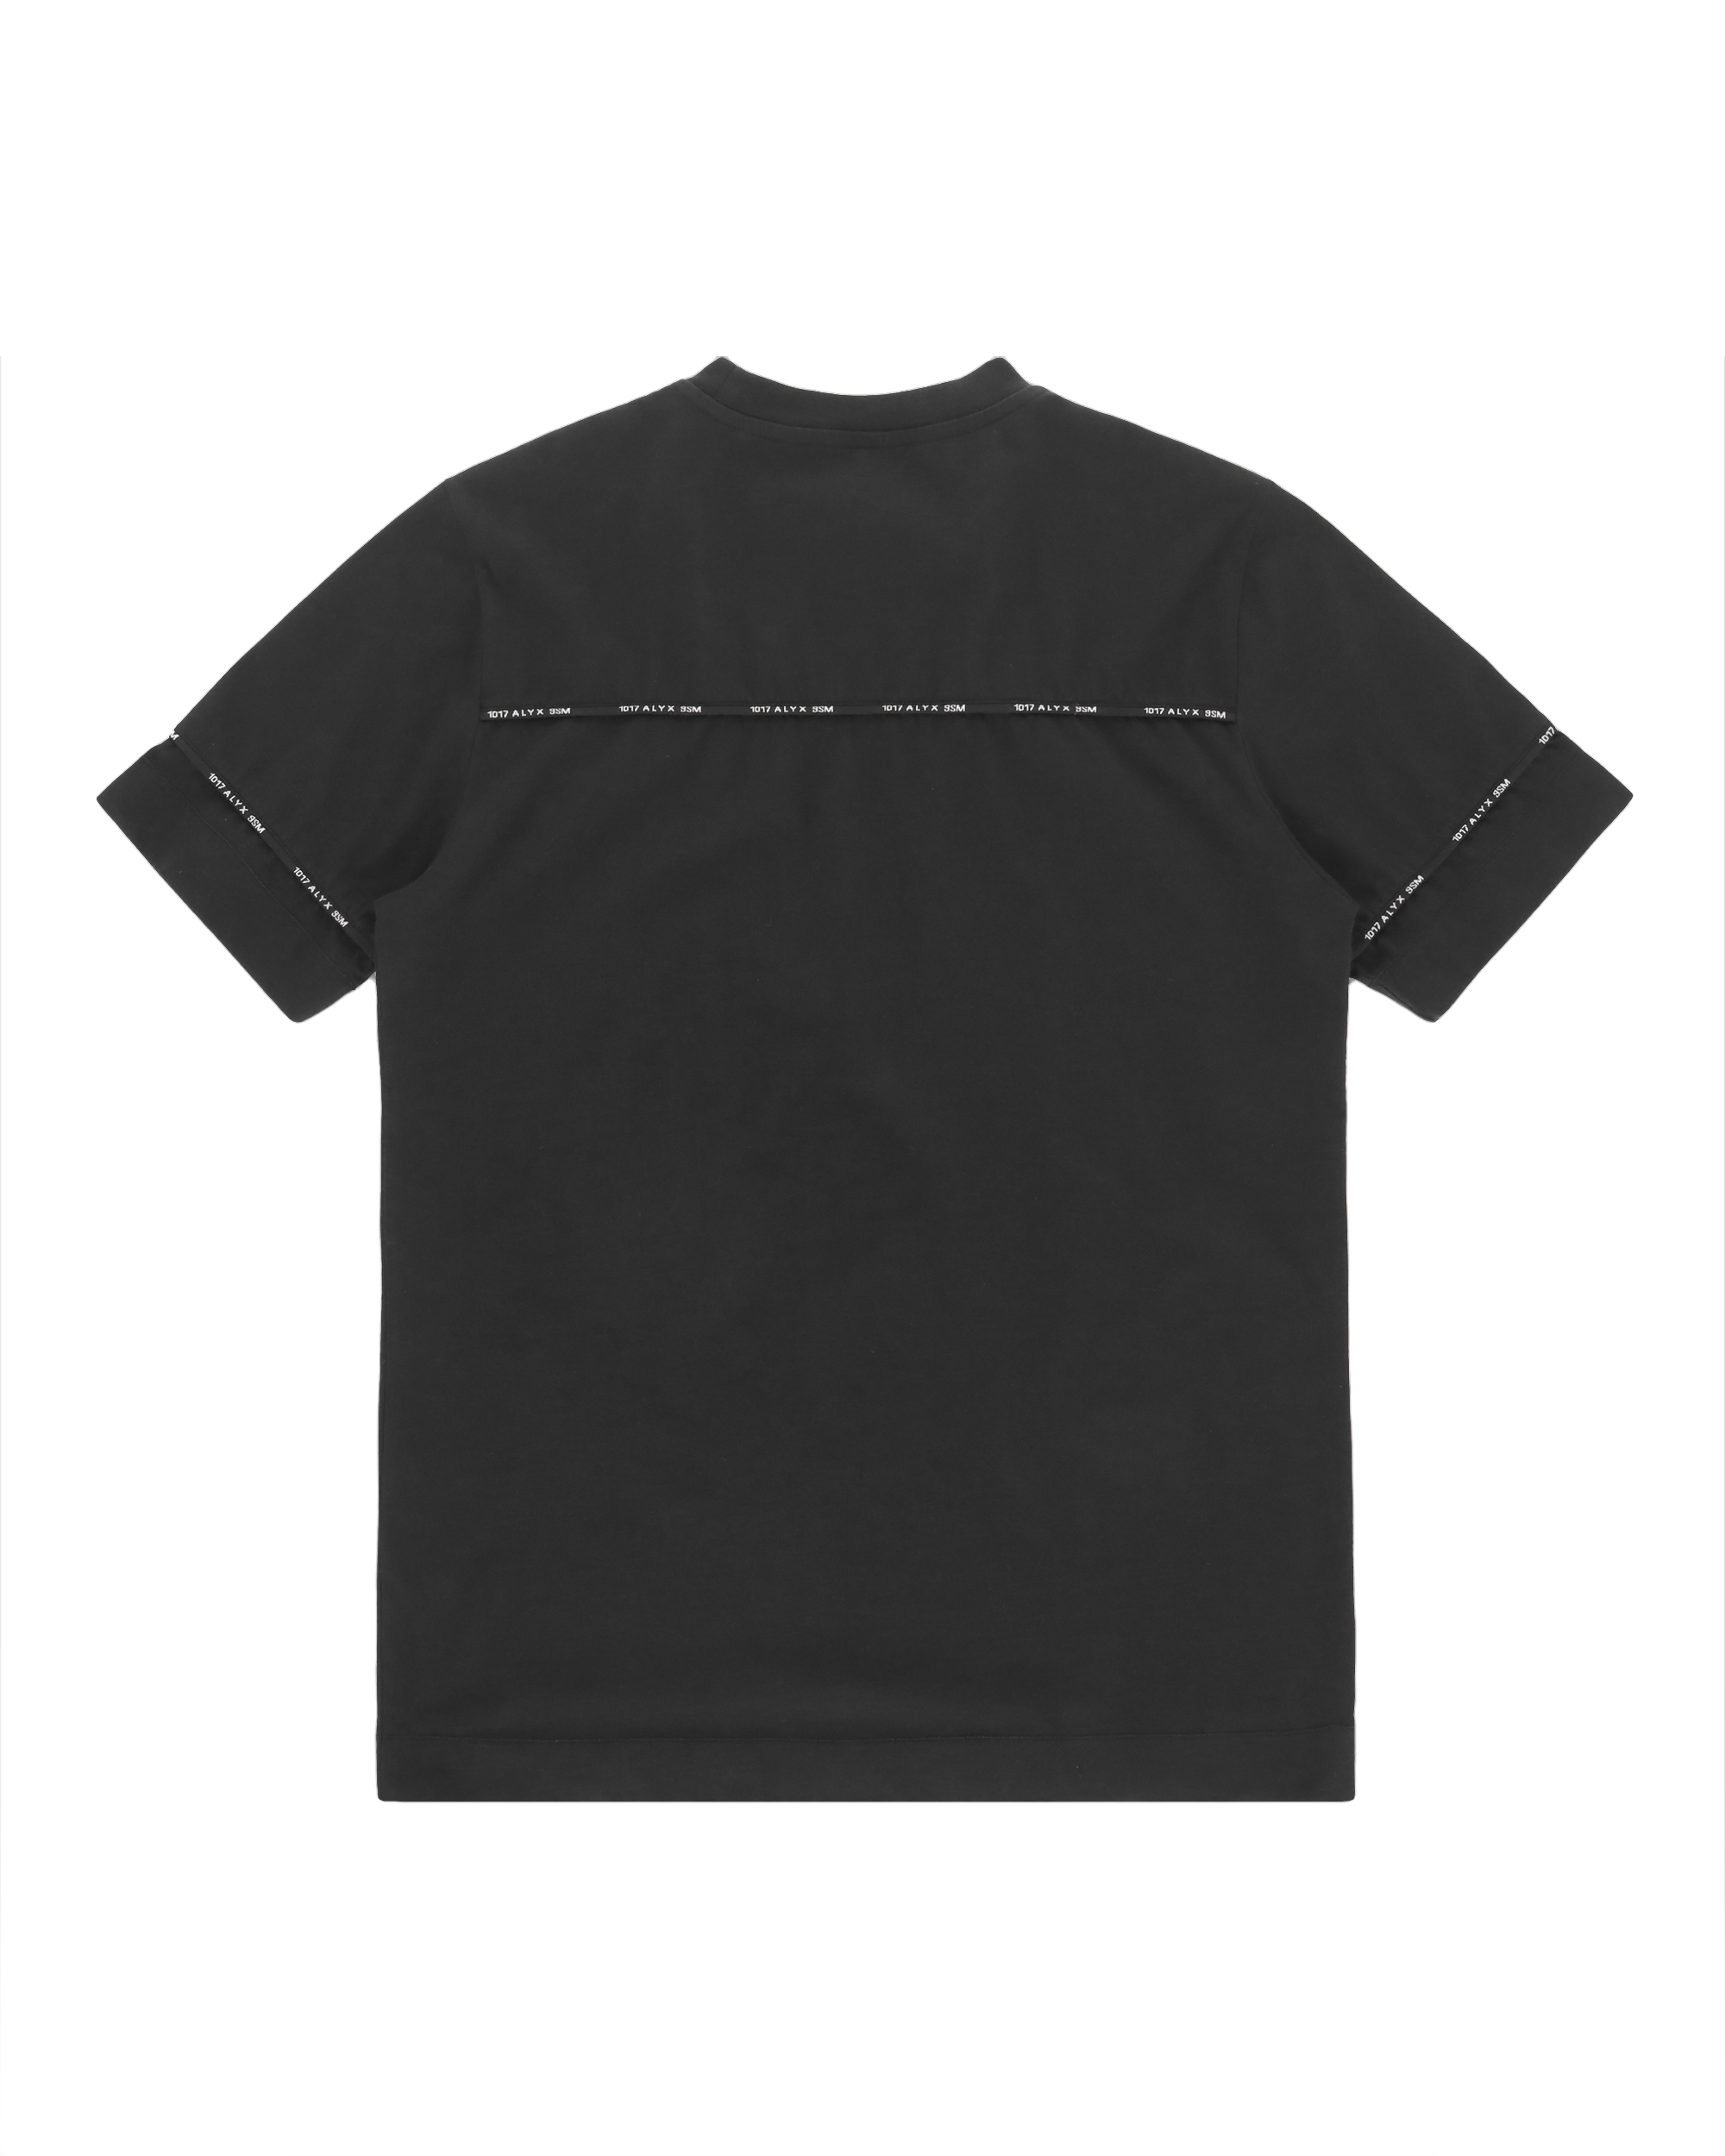 COLLECTION LOGO GRAPHIC T-SHIRT